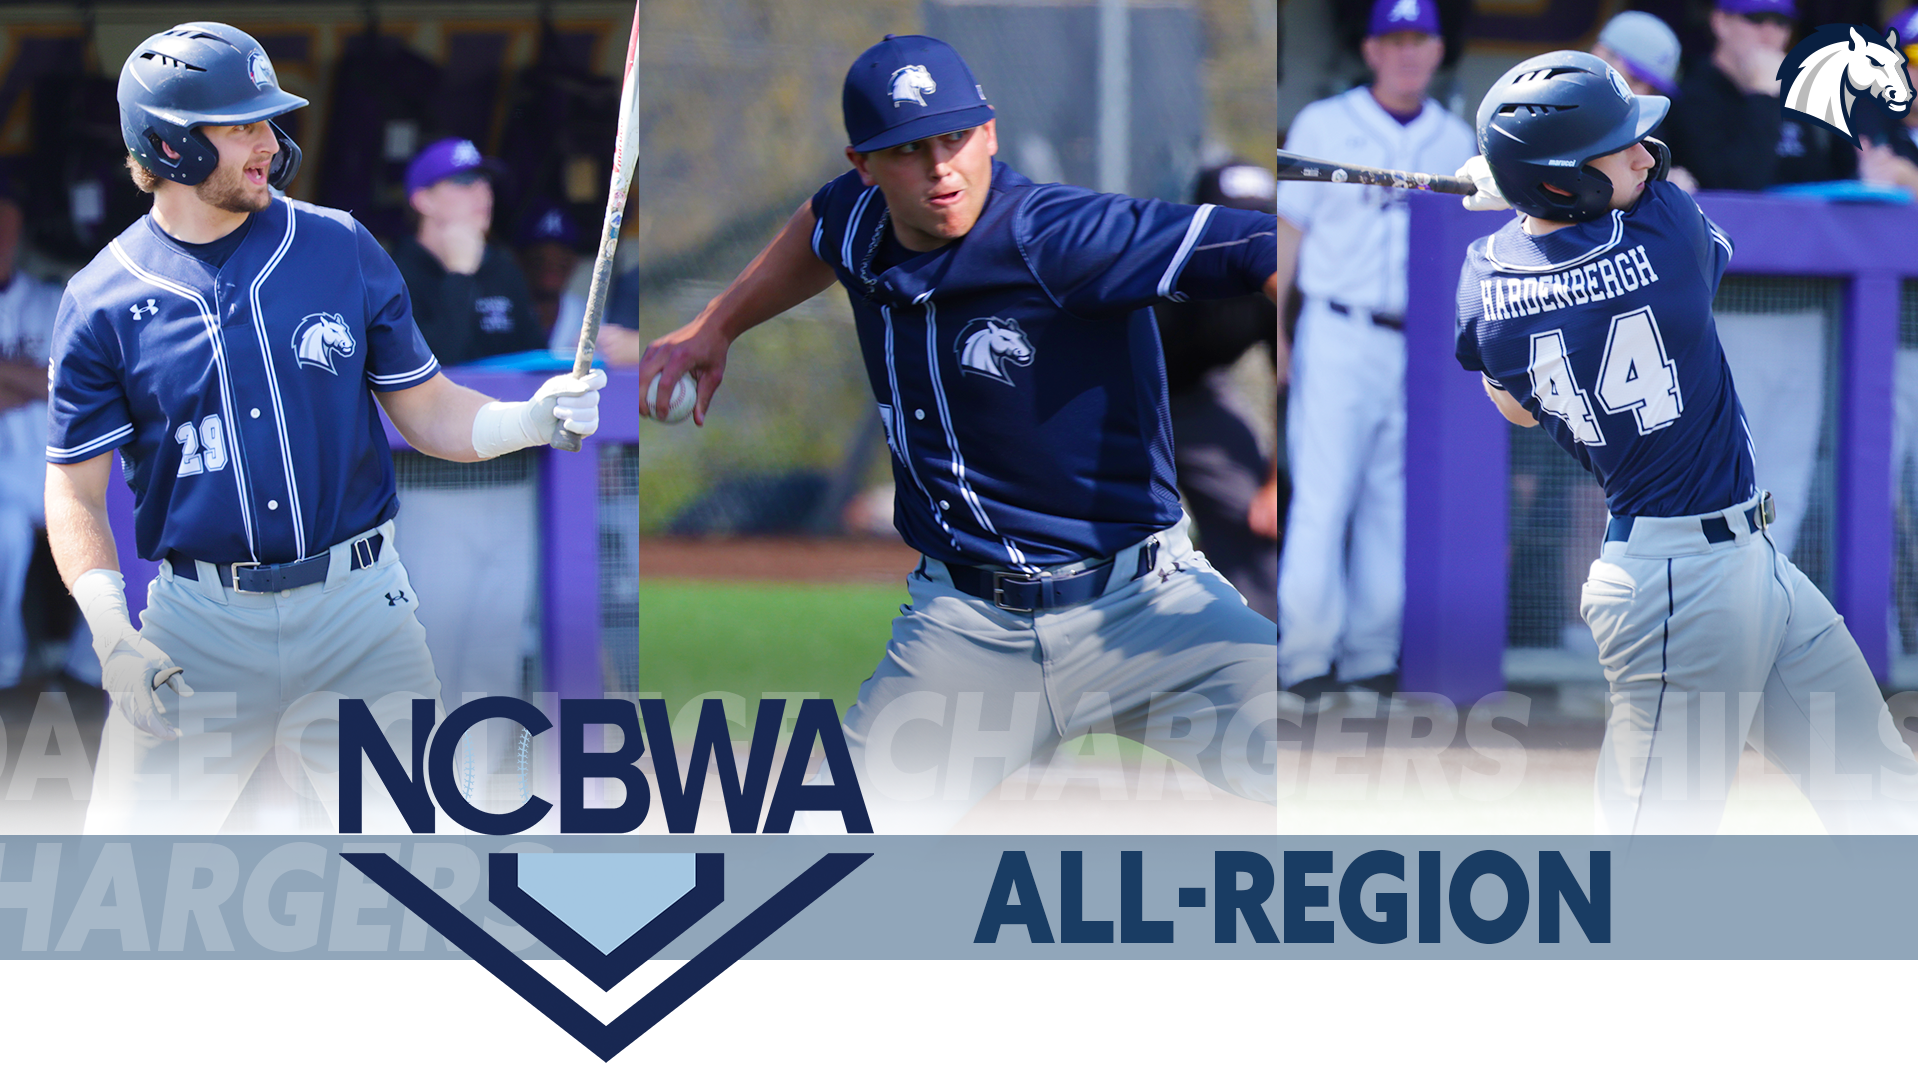 Hillsdale's Barnhart named NCBWA First Team All-Region; two Chargers earn honorable mention